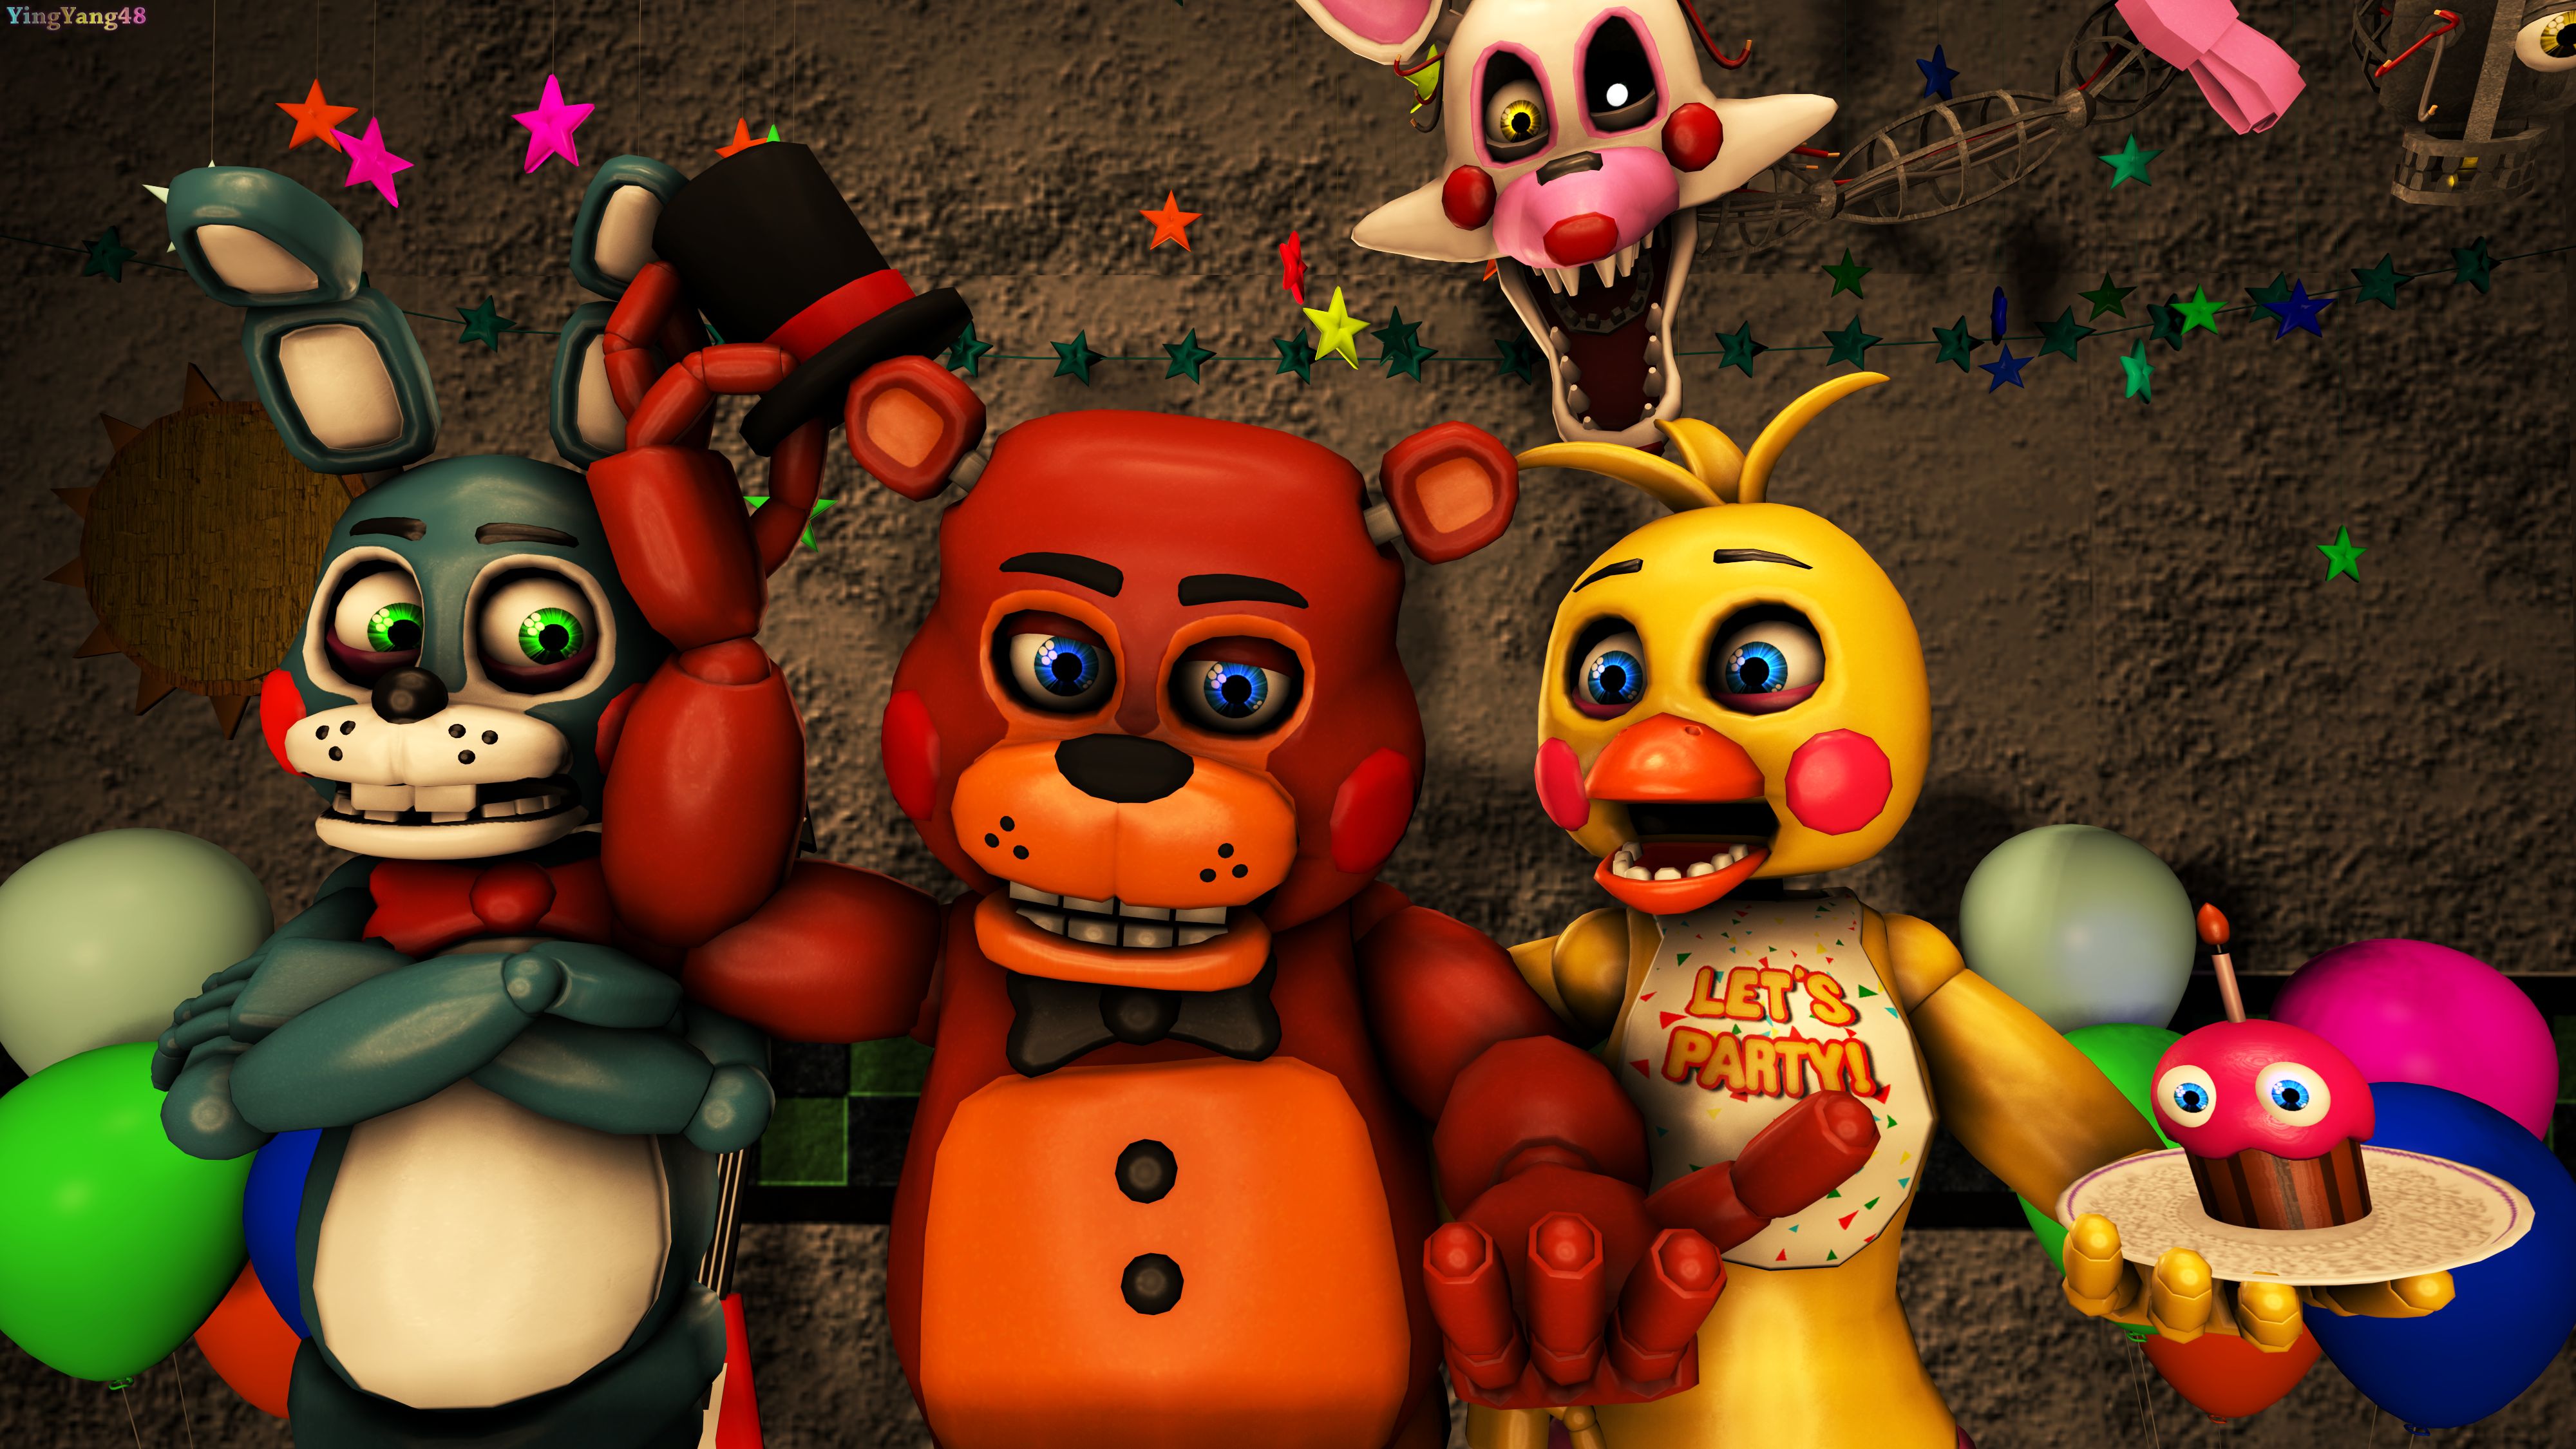 five nights at freddy's 2, video game, five nights at freddy's